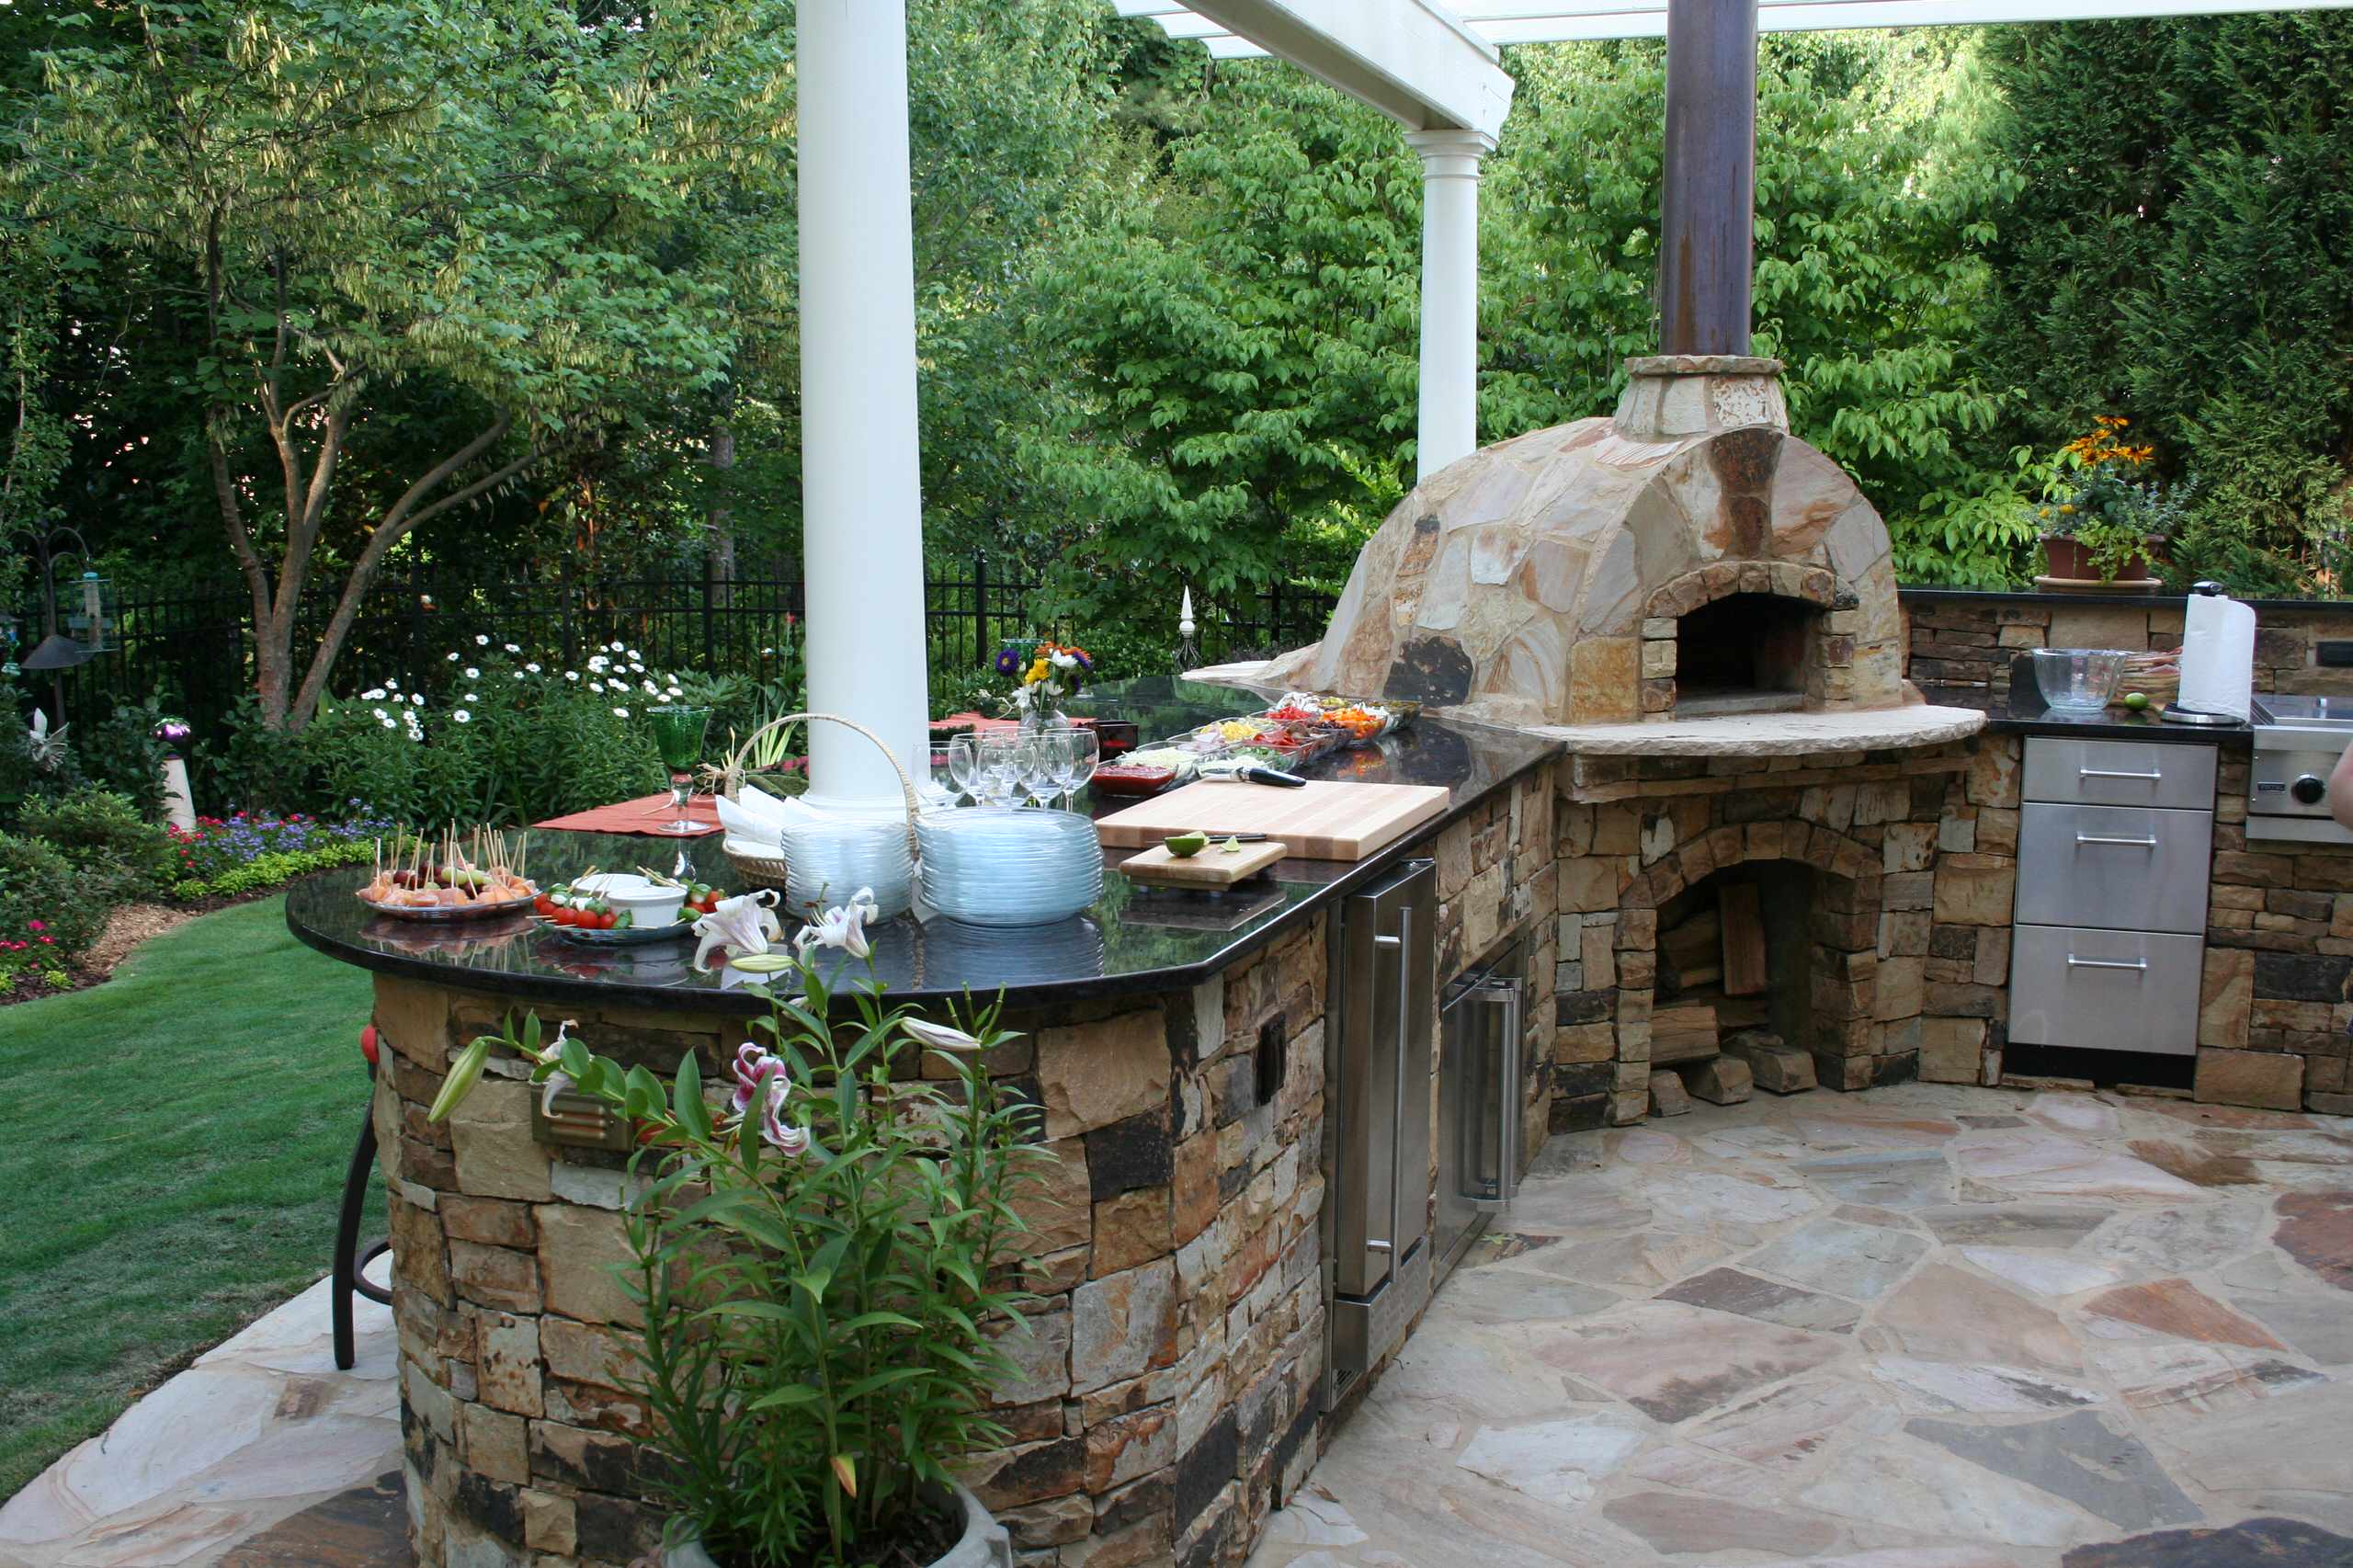 https://st.hzcdn.com/simgs/pictures/patios/outdoor-kitchen-and-pizza-oven-built-in-grill-legacy-landscape-design-llc-img~70419fd500edcded_14-9347-1-920c570.jpg